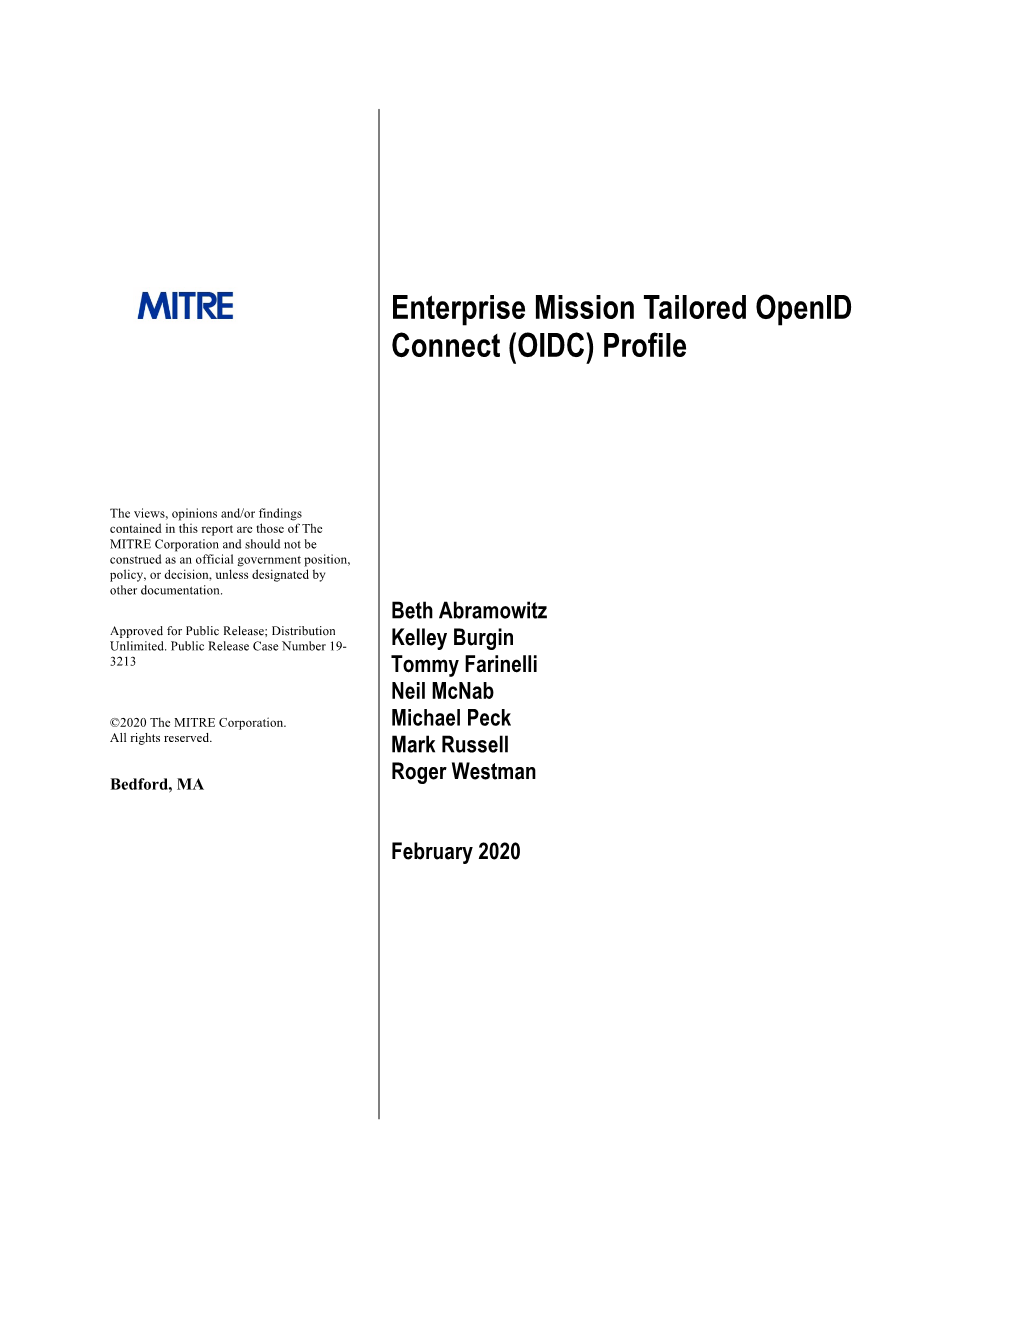 Enterprise Mission Tailored Openid Connect (OIDC)